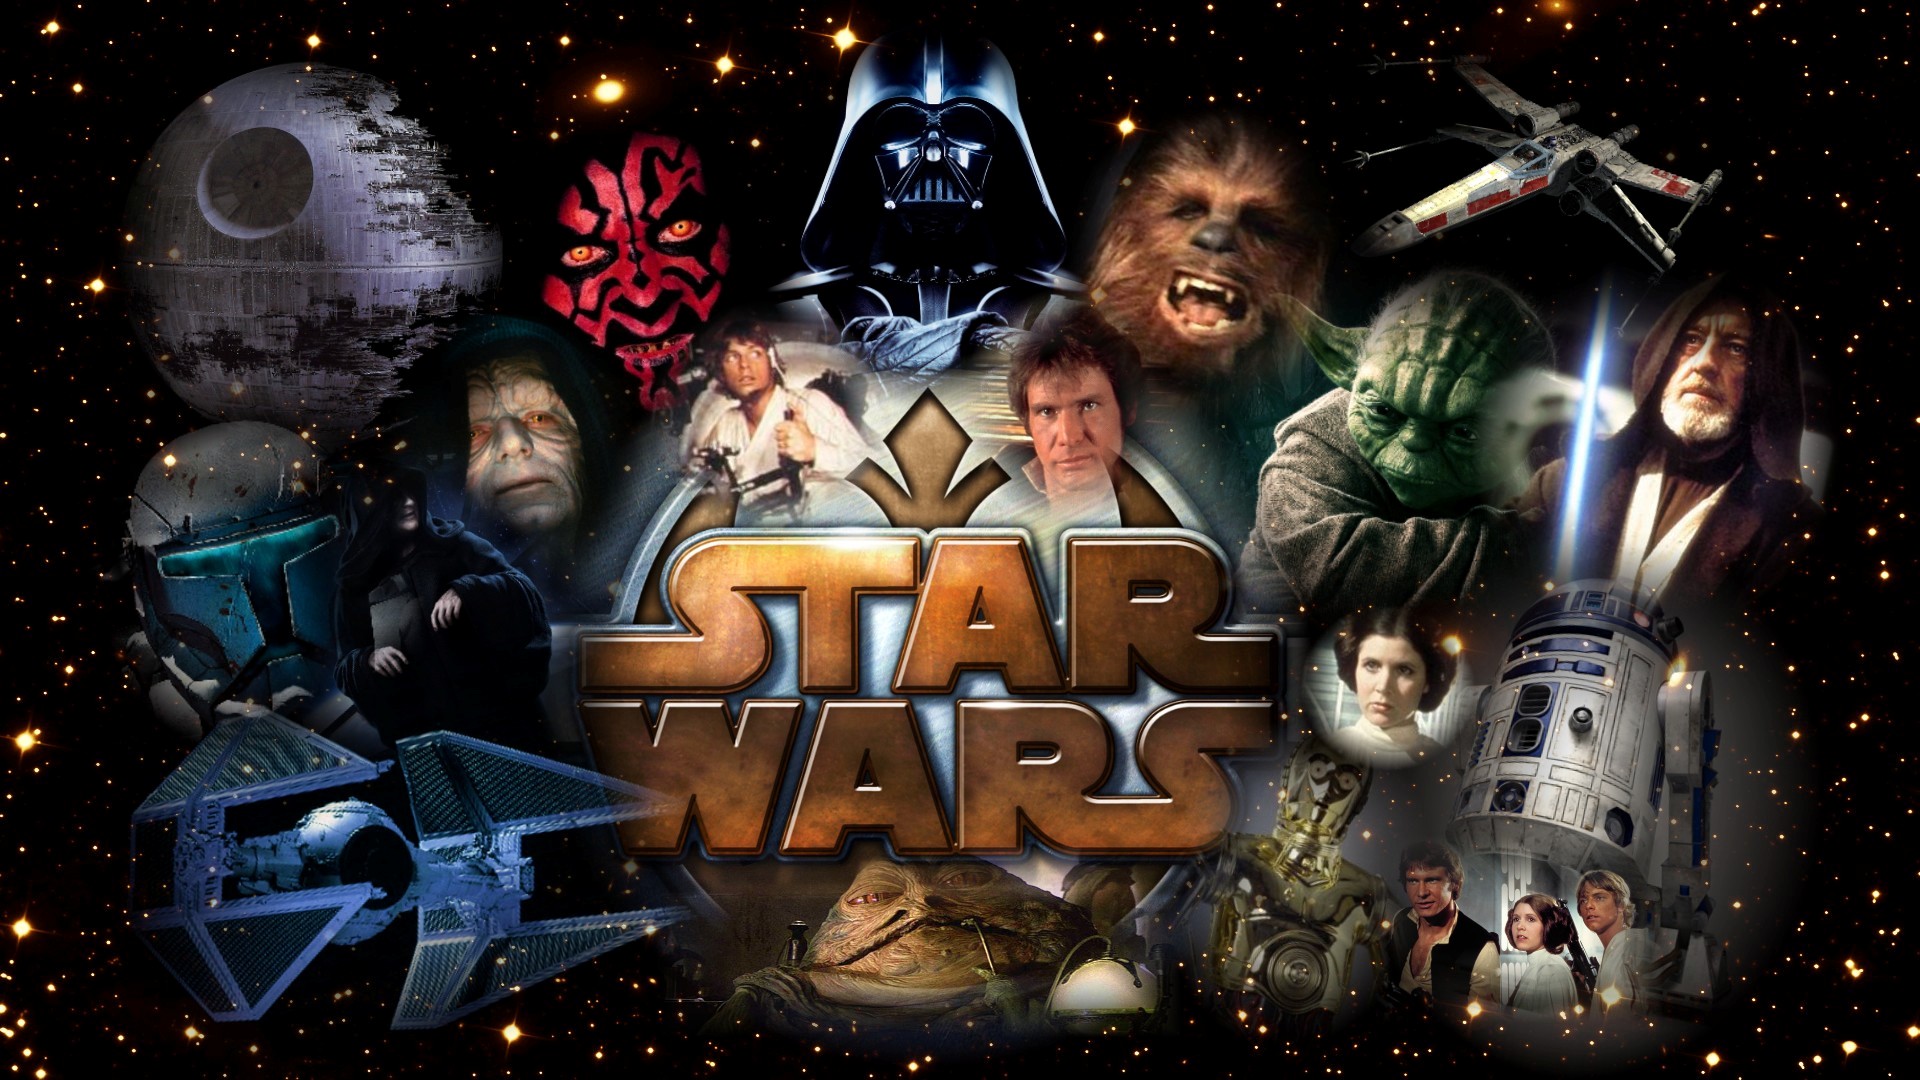 STAR WARS BACKGROUNDS WERQ112 | Wallpaperf1